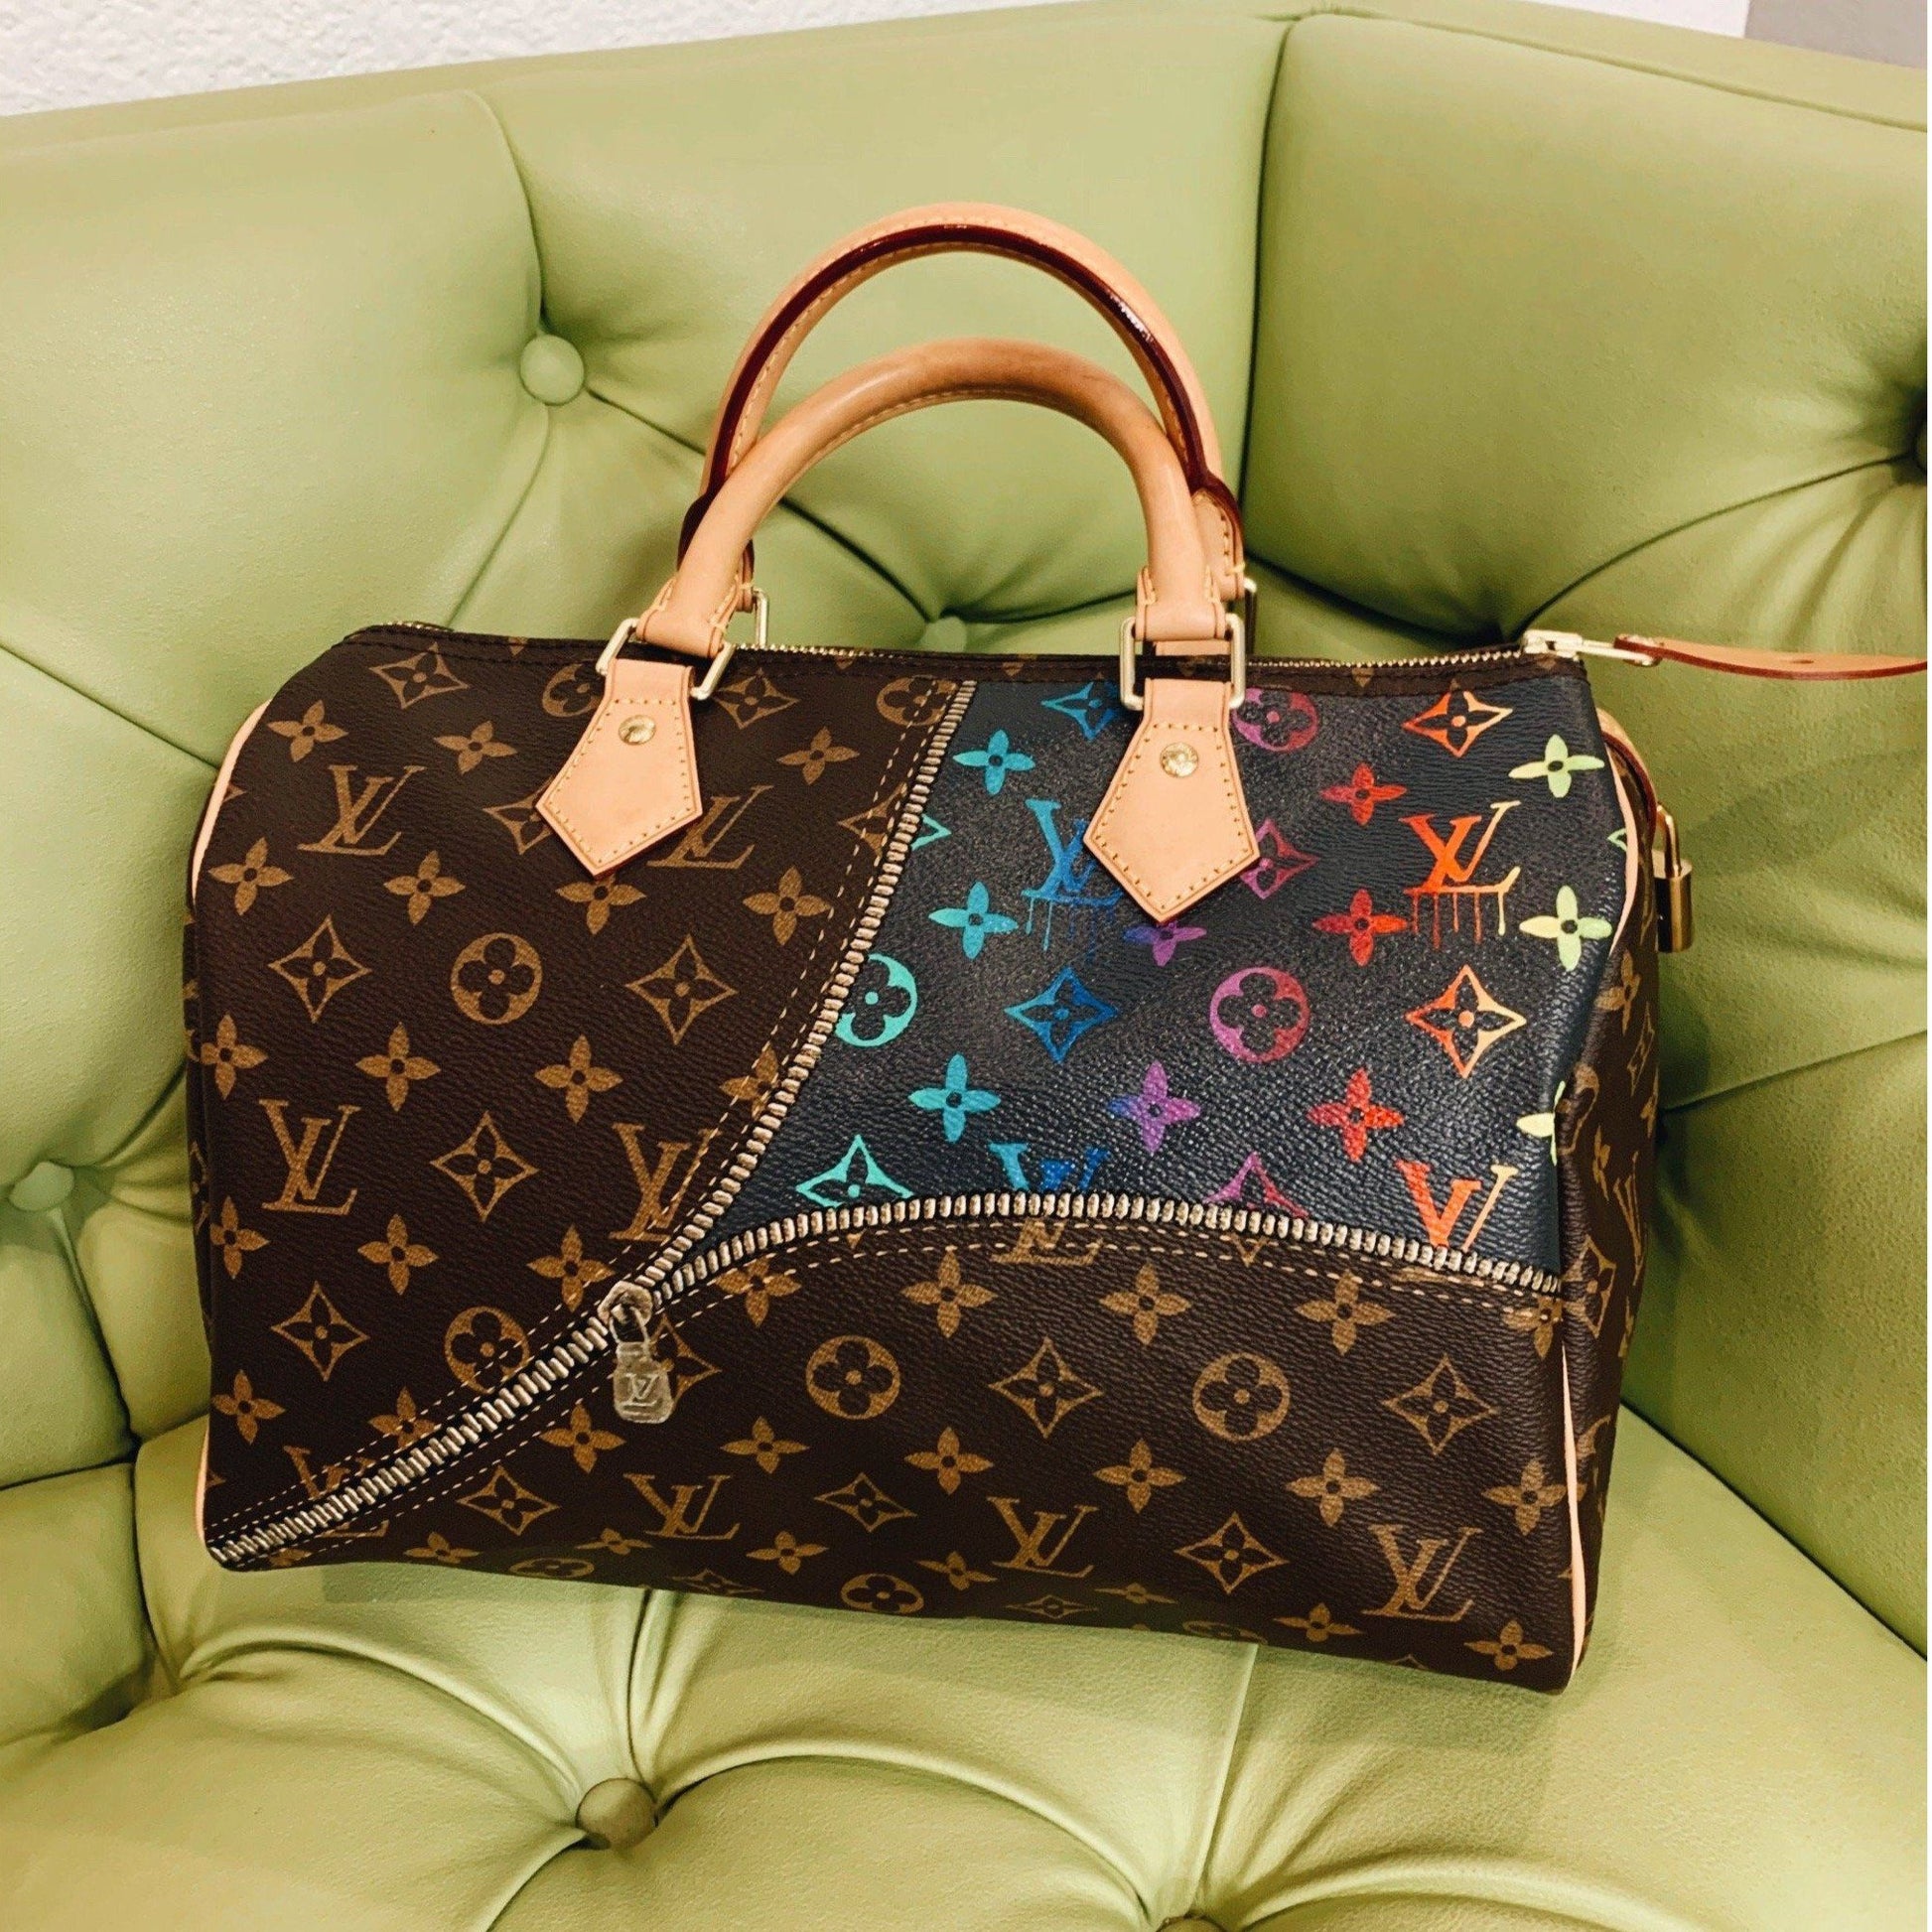 Unzipped Monogramed Gradients Artwork, Painted on a Louis Vuitton Speedy Bag by New Vintage